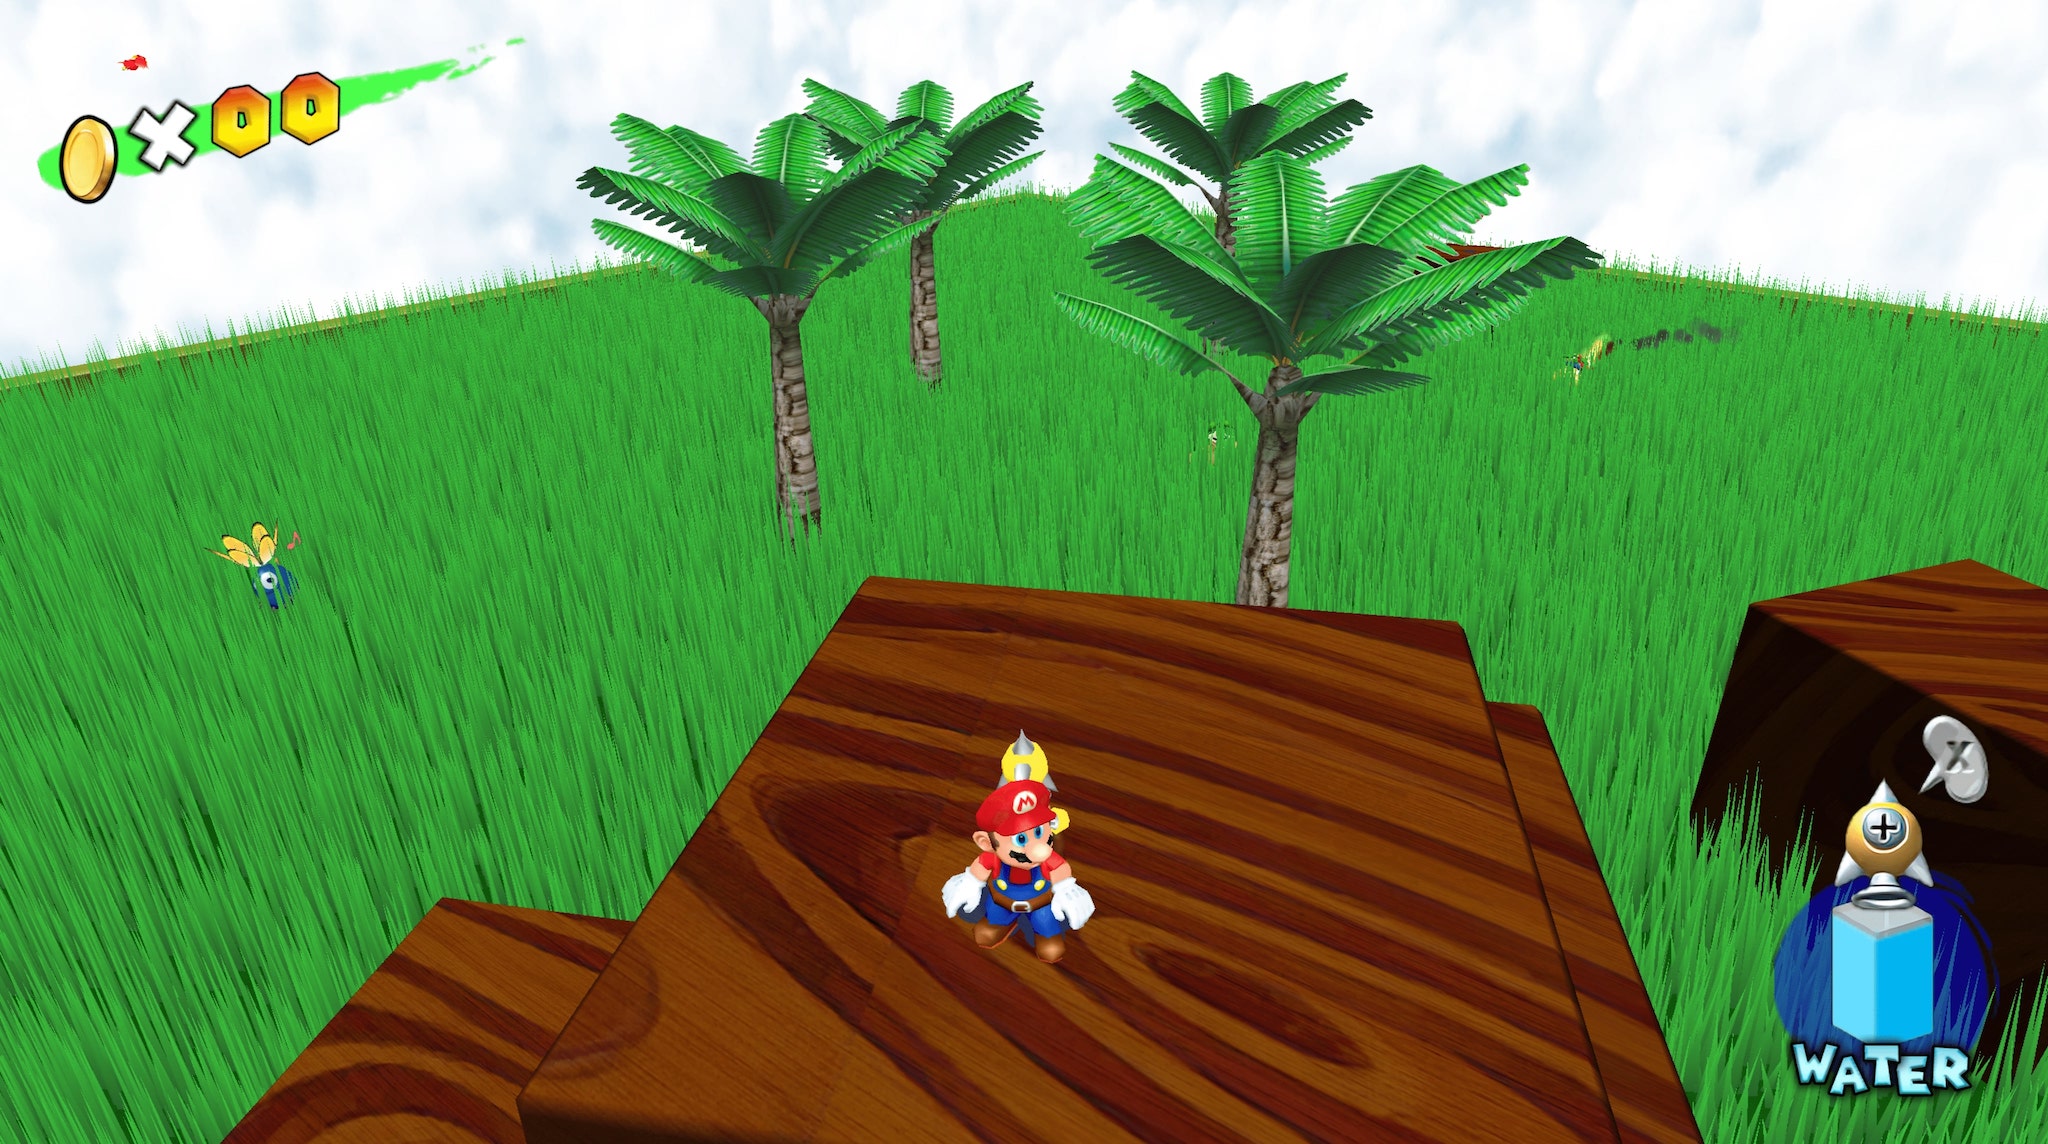 Super Mario Sunshine standing in secret red coin stage